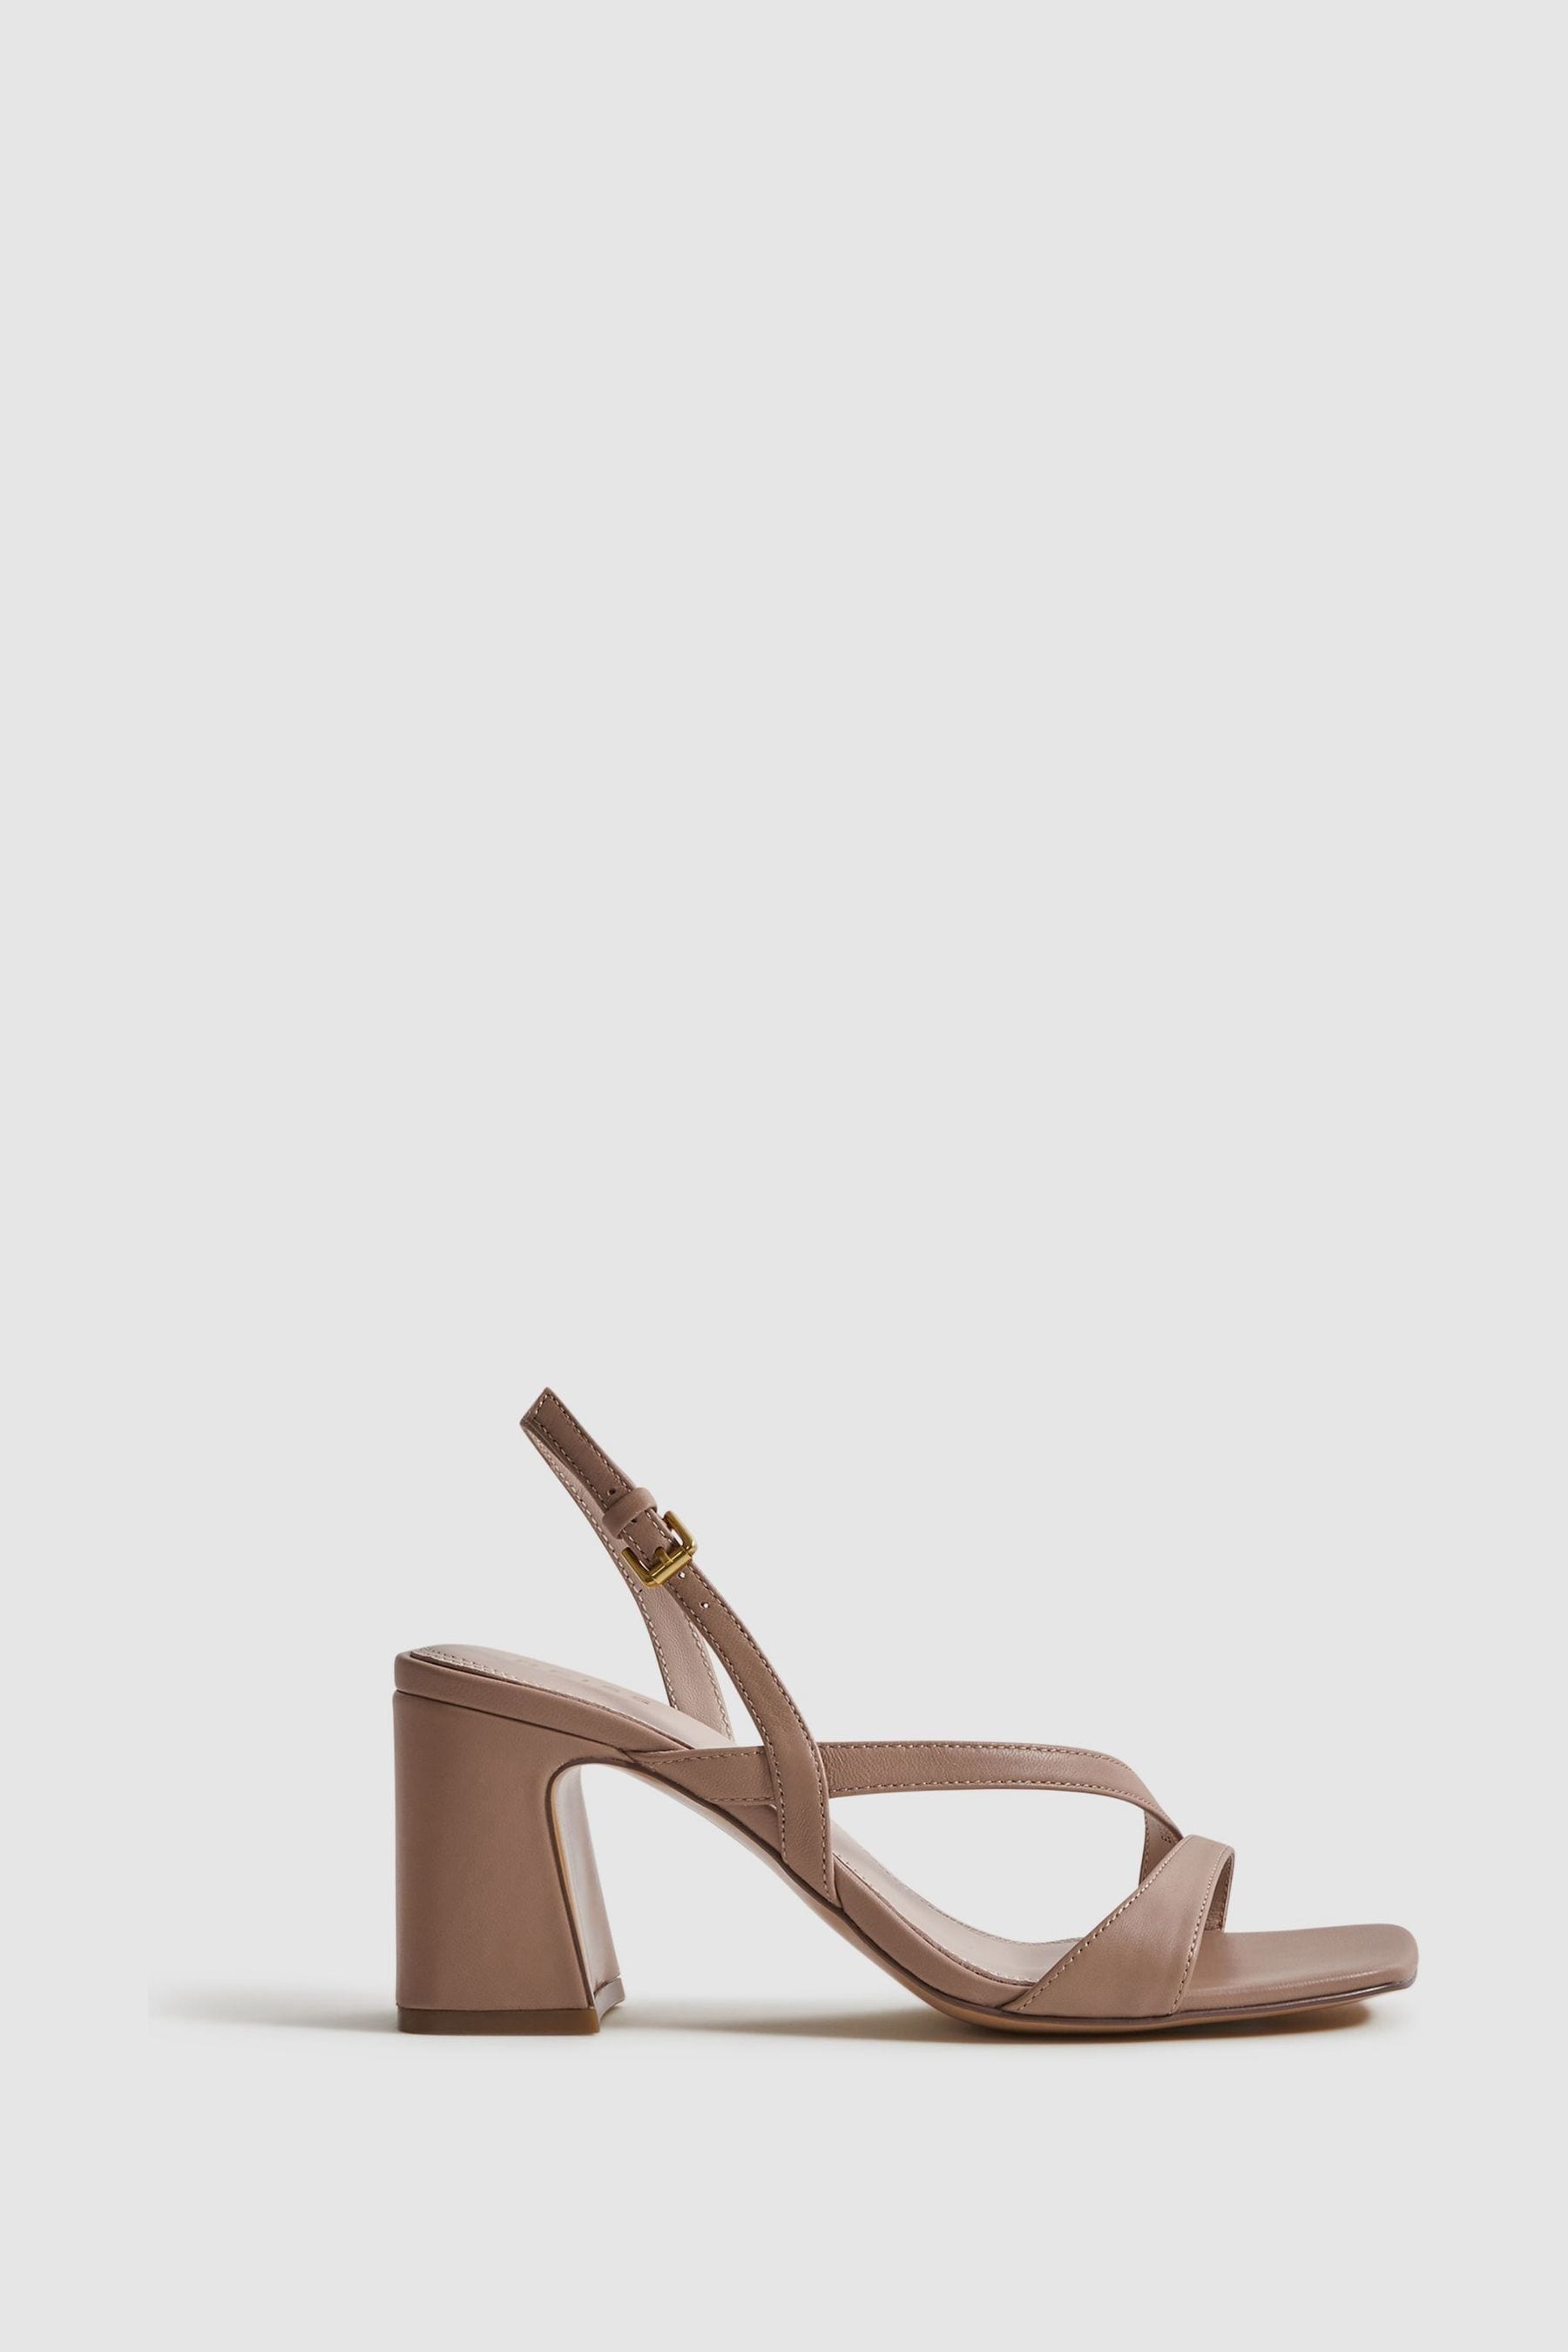 Reiss Alice - Nude Strappy Leather Heeled Sandals, Us 6